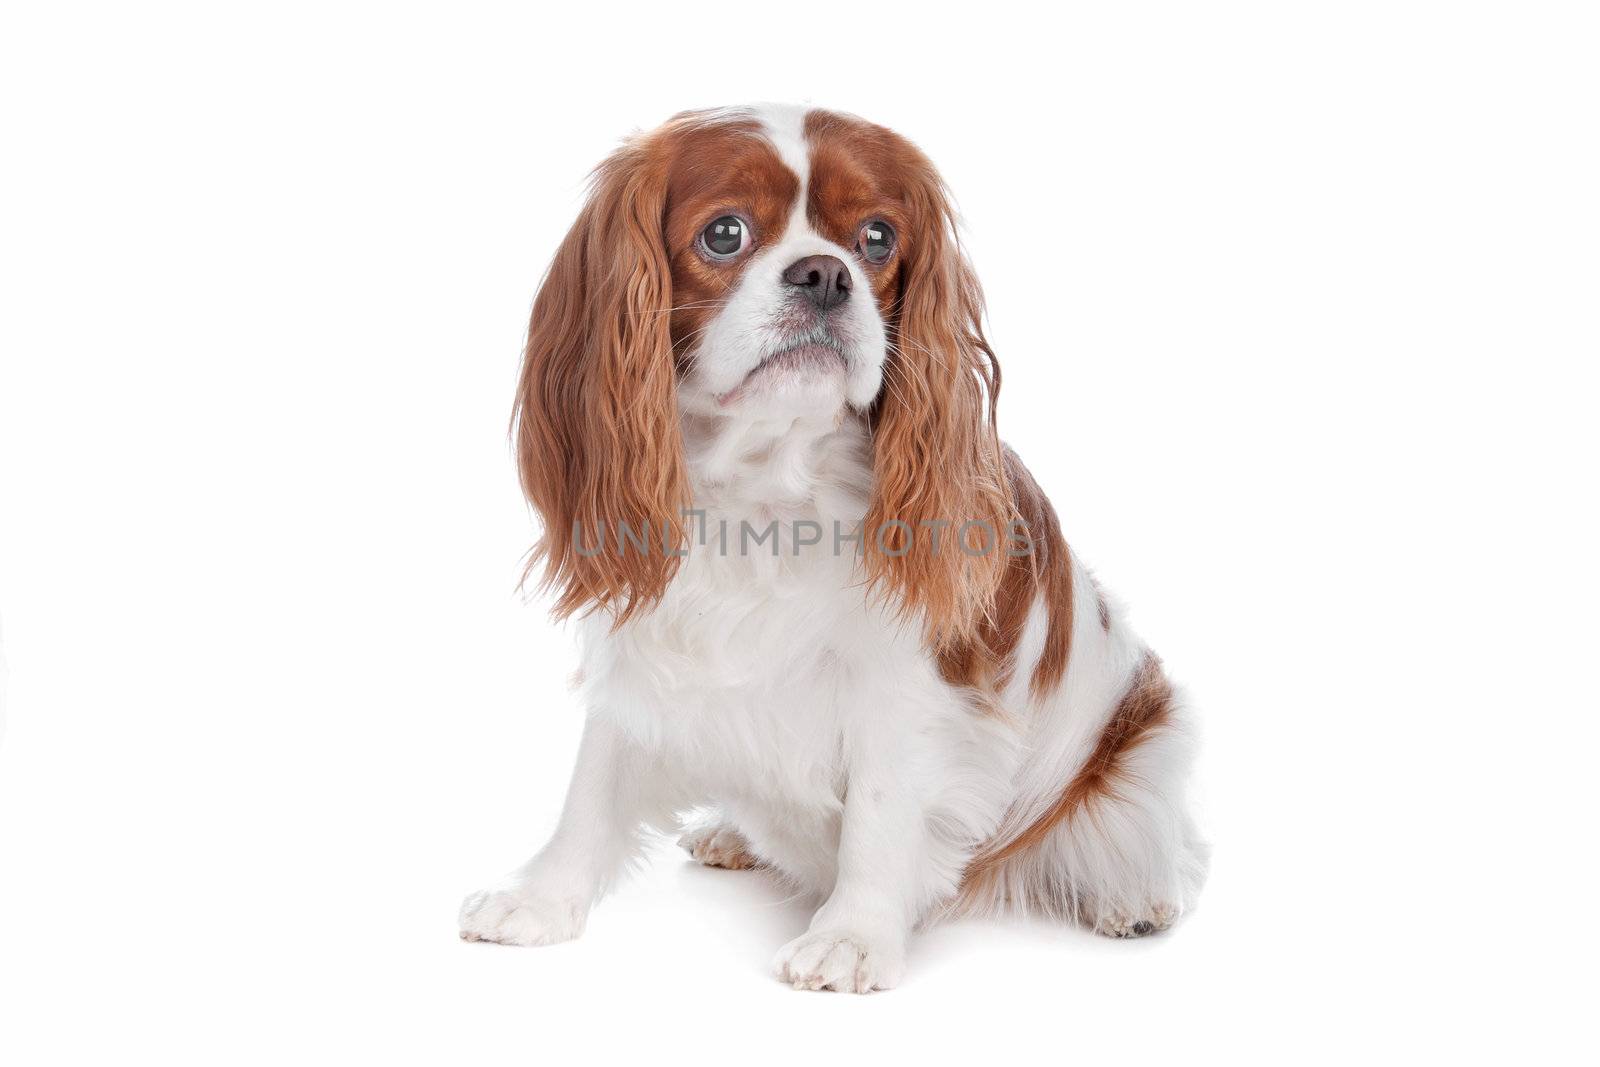 Cavalier King Charles Spaniel dog sitting, isolated on a white background